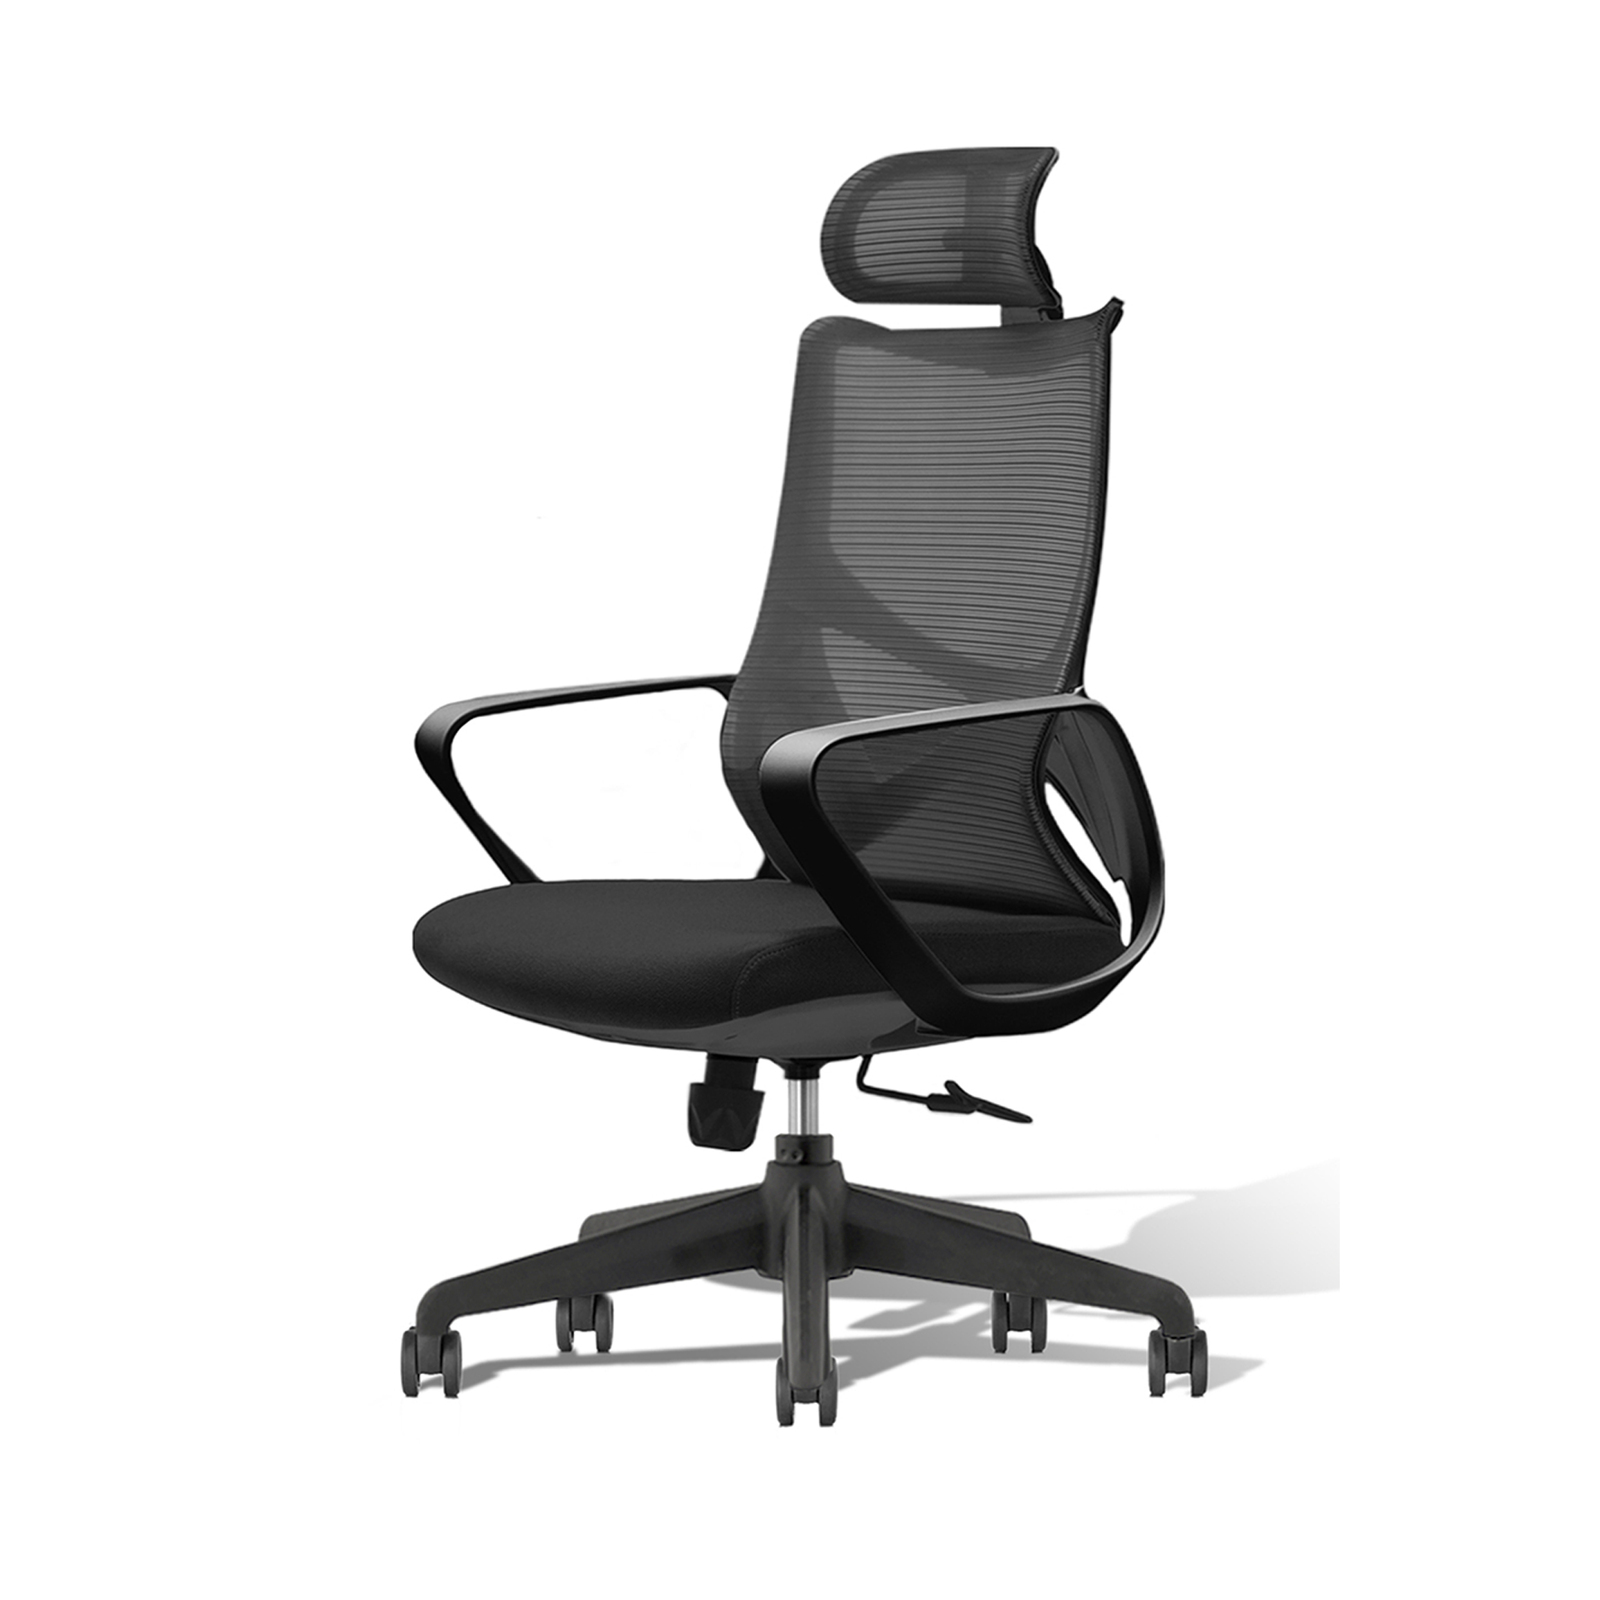 MIUZ COSMO Chair With Headrest Adjustable Breathable Ergonomic Mesh Office Computer Chair with Lumbar Support & Headrest Swivel